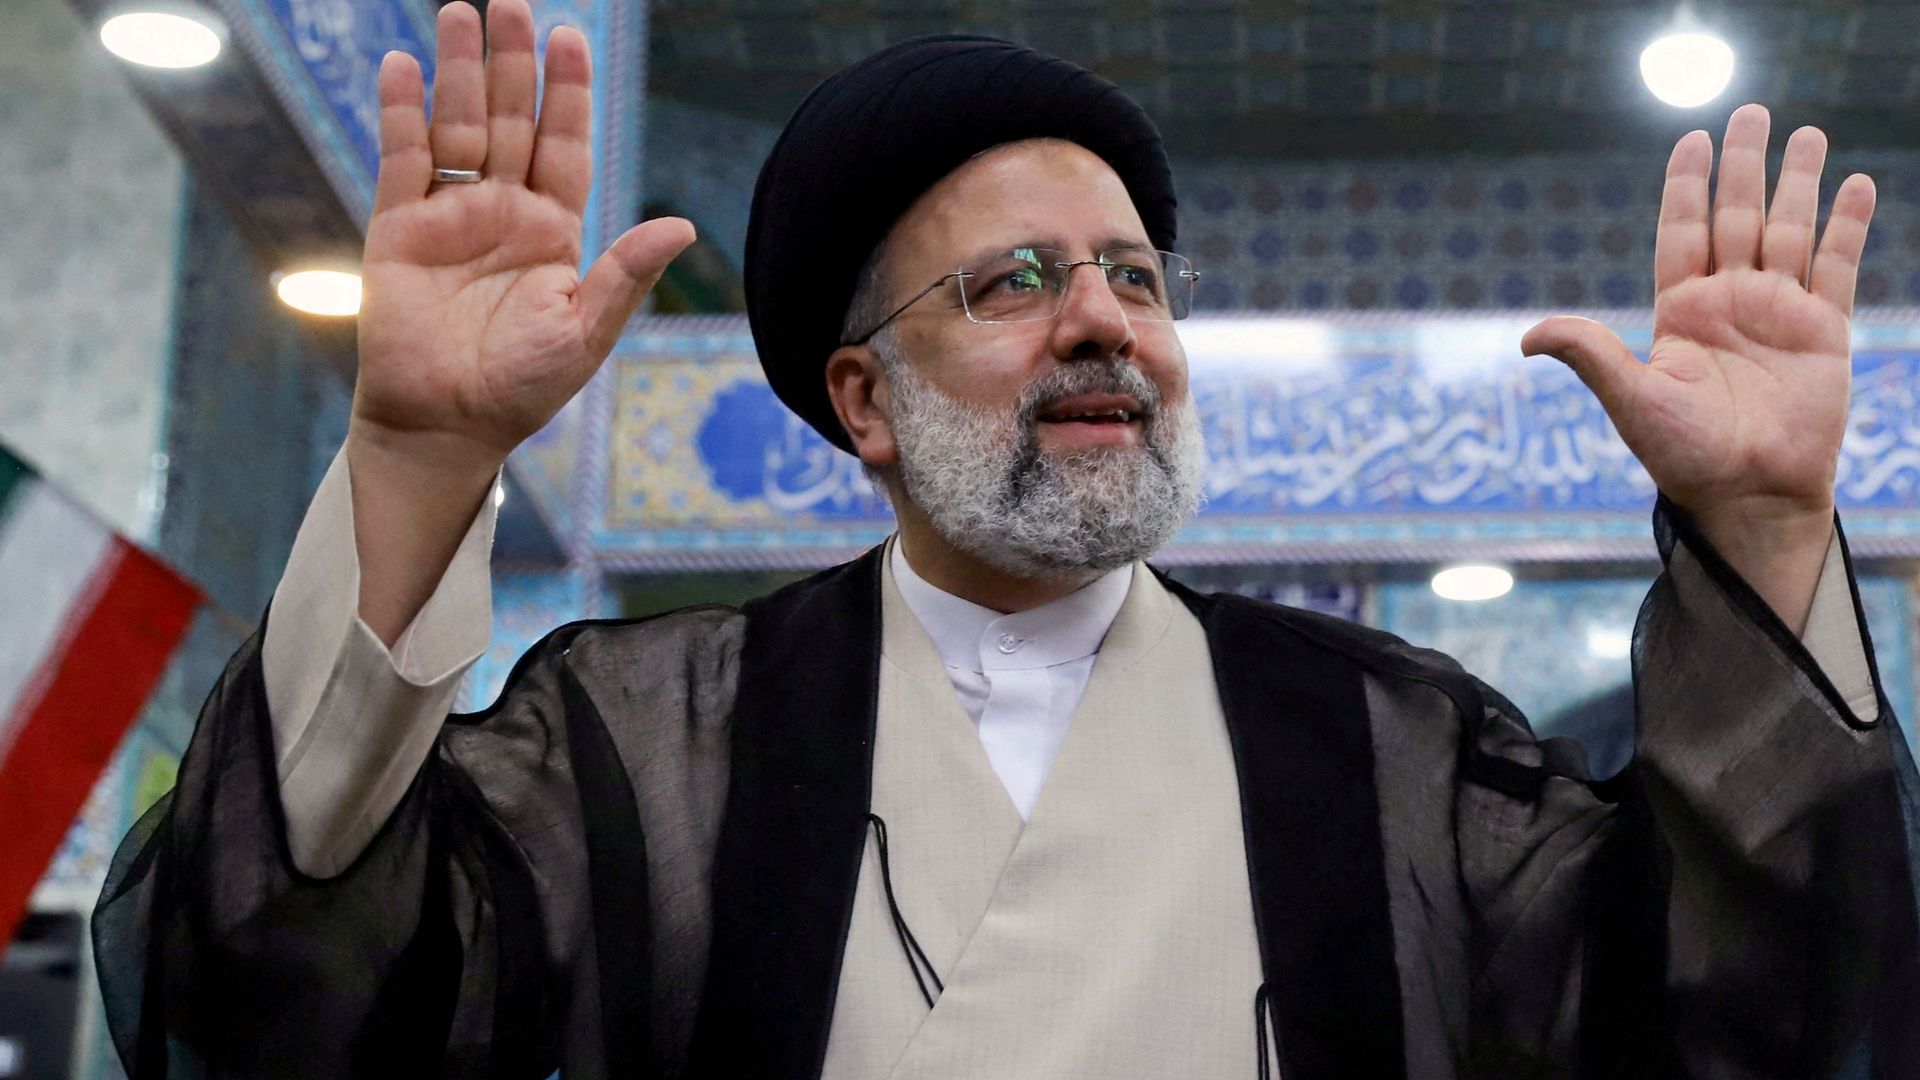 How will the death of President Raisi impact Iran? Will it lead to a change in the region's militaristic landscape? Depends who you ask.